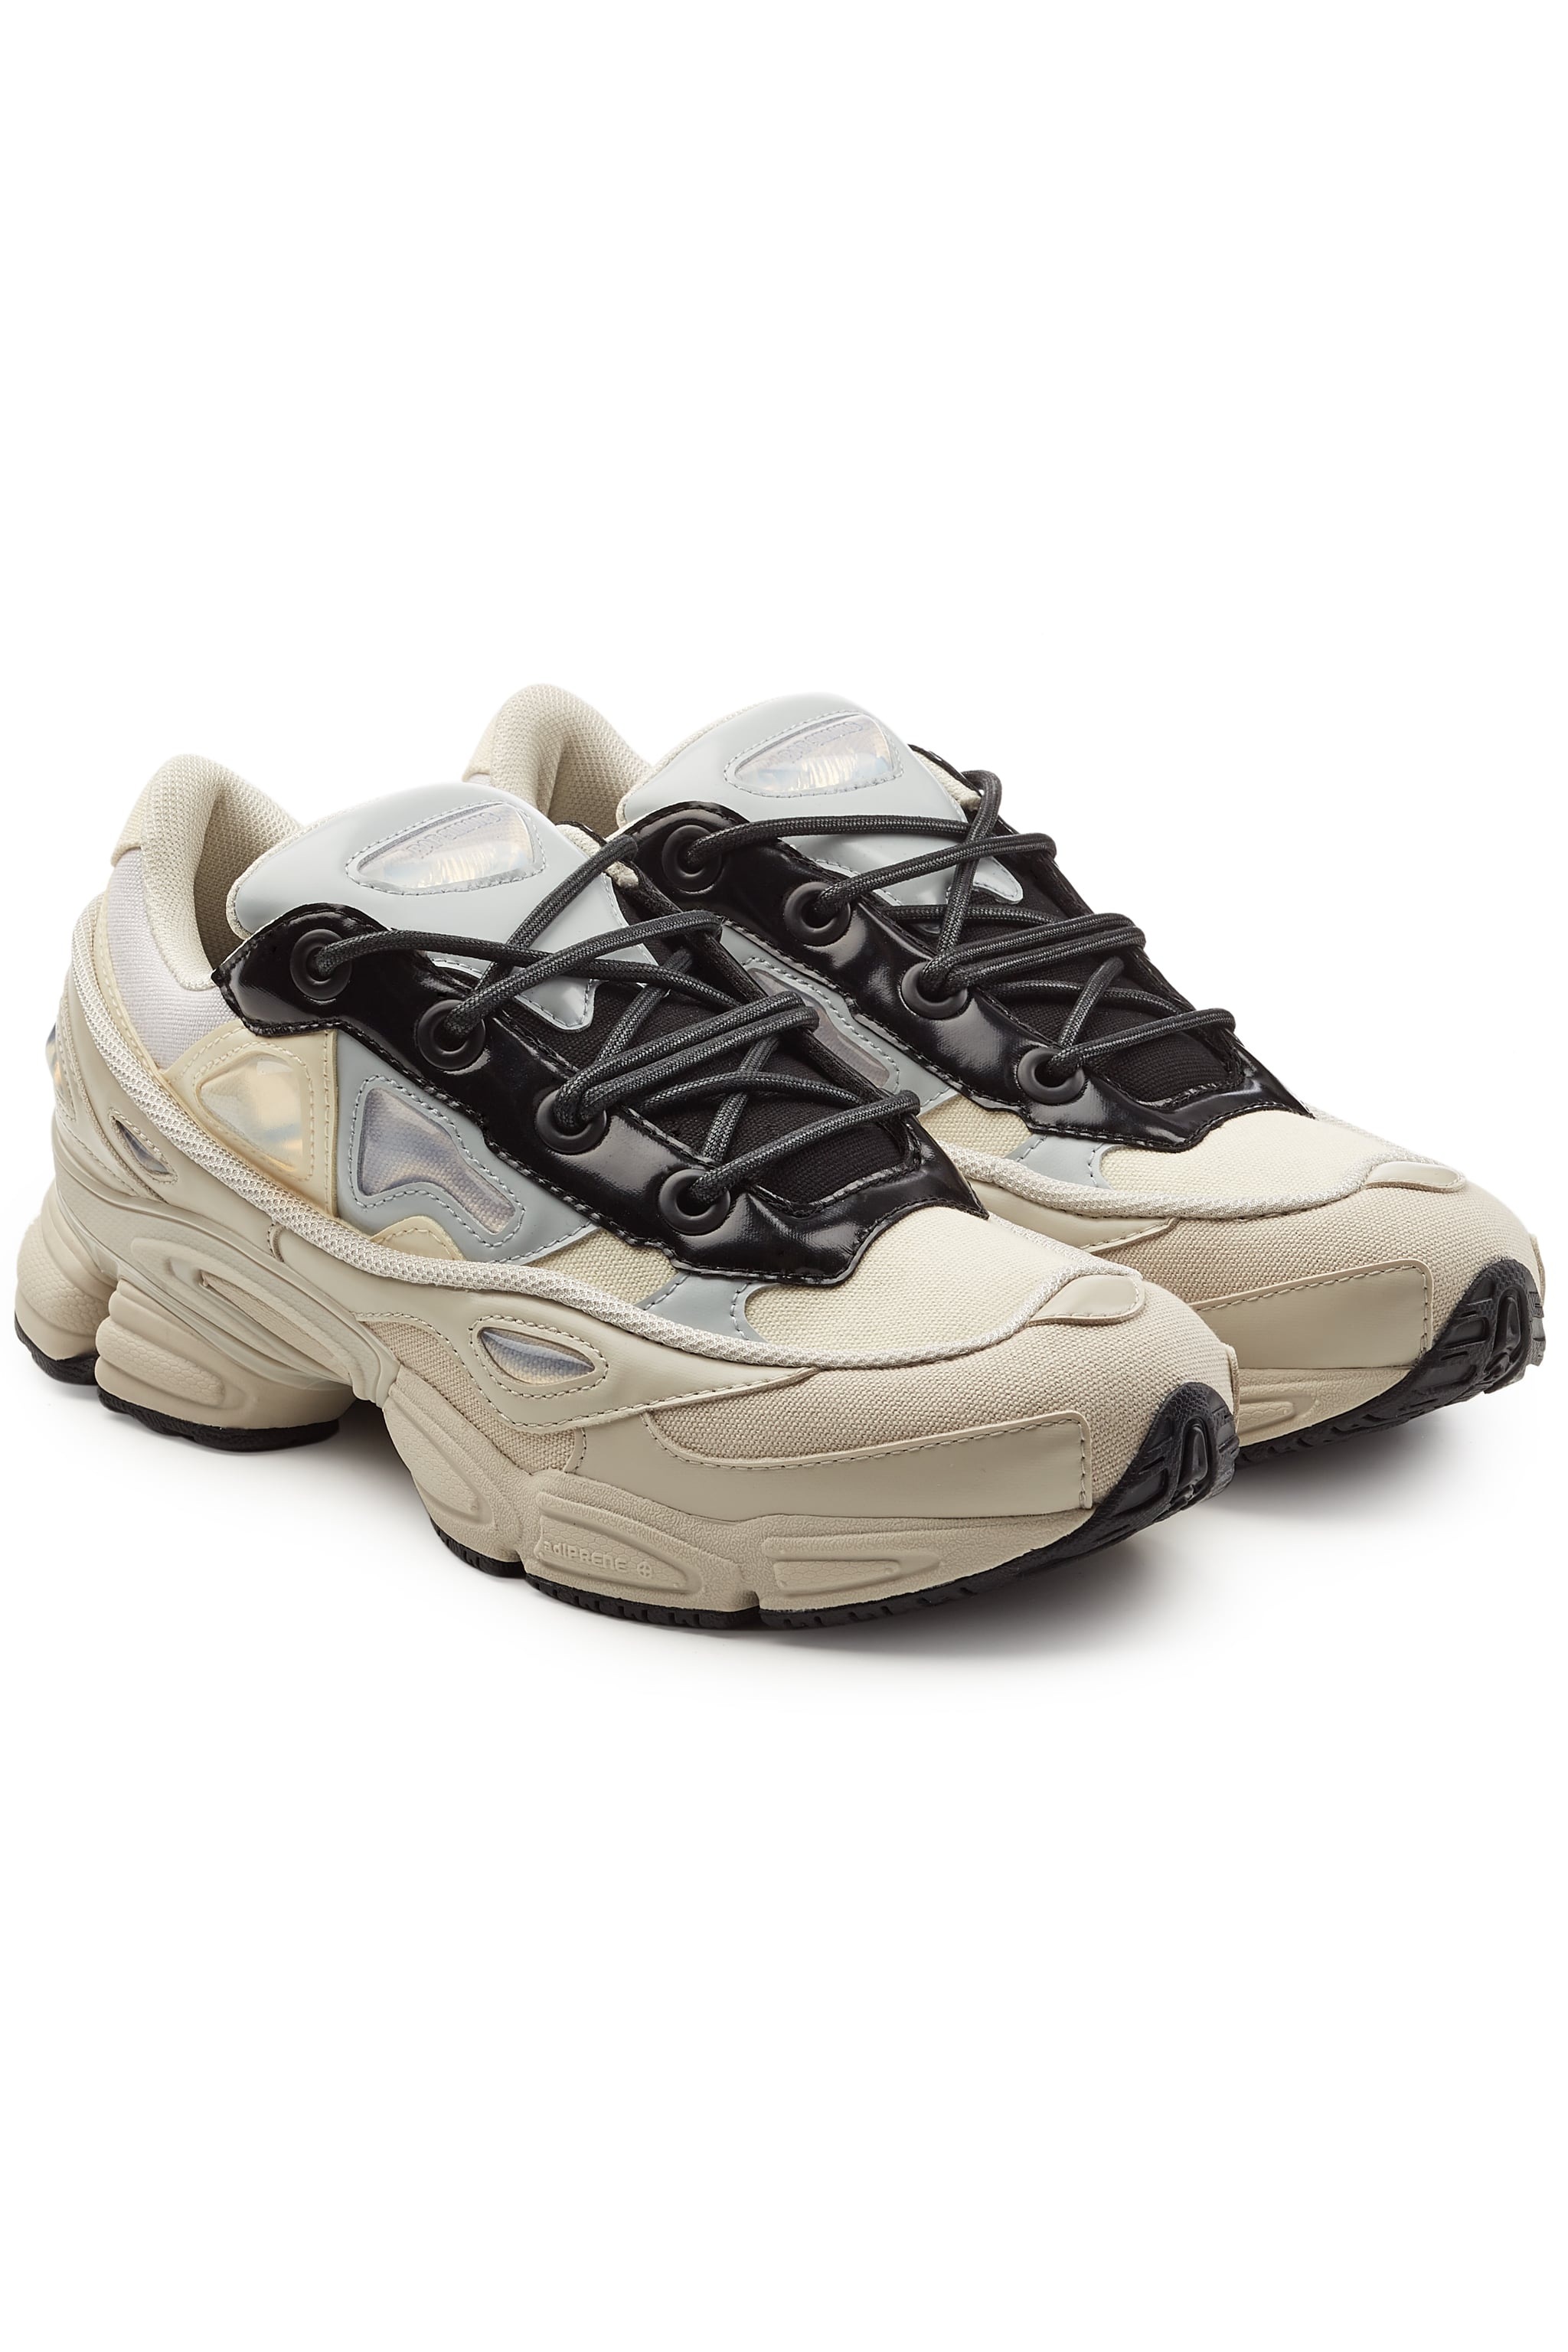 Adidas by Raf Simons RS Ozweego III Sneakers | We're Sharing the Stuff  We're Shopping This February Because We Love You | POPSUGAR Fashion Photo 3